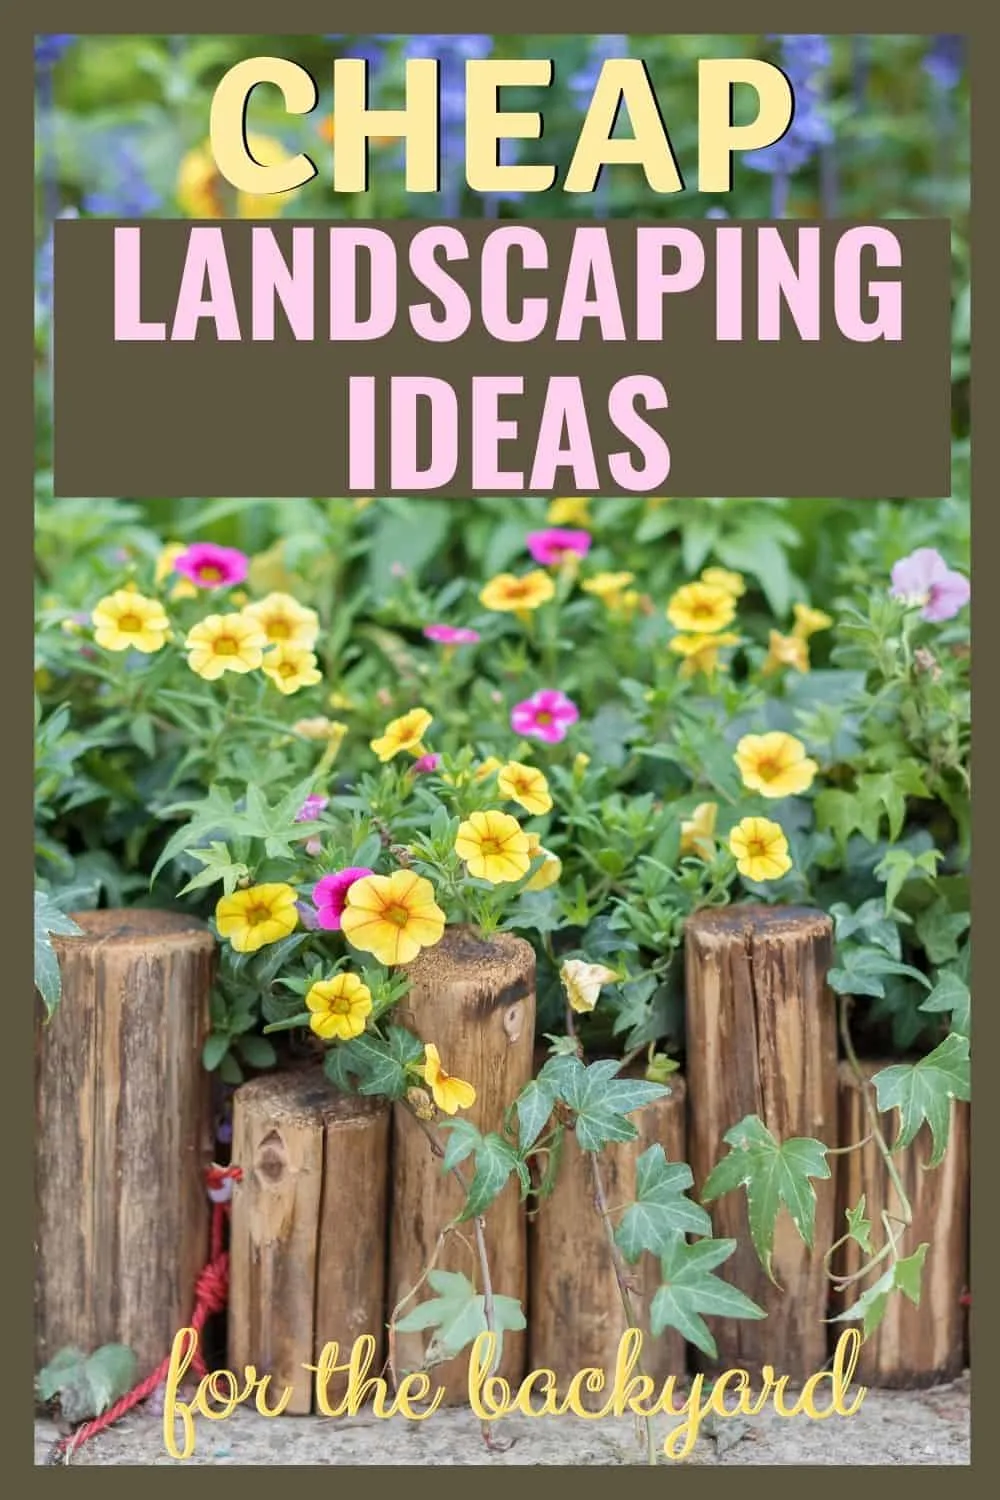 Cheap landscaping ideas for the backyard